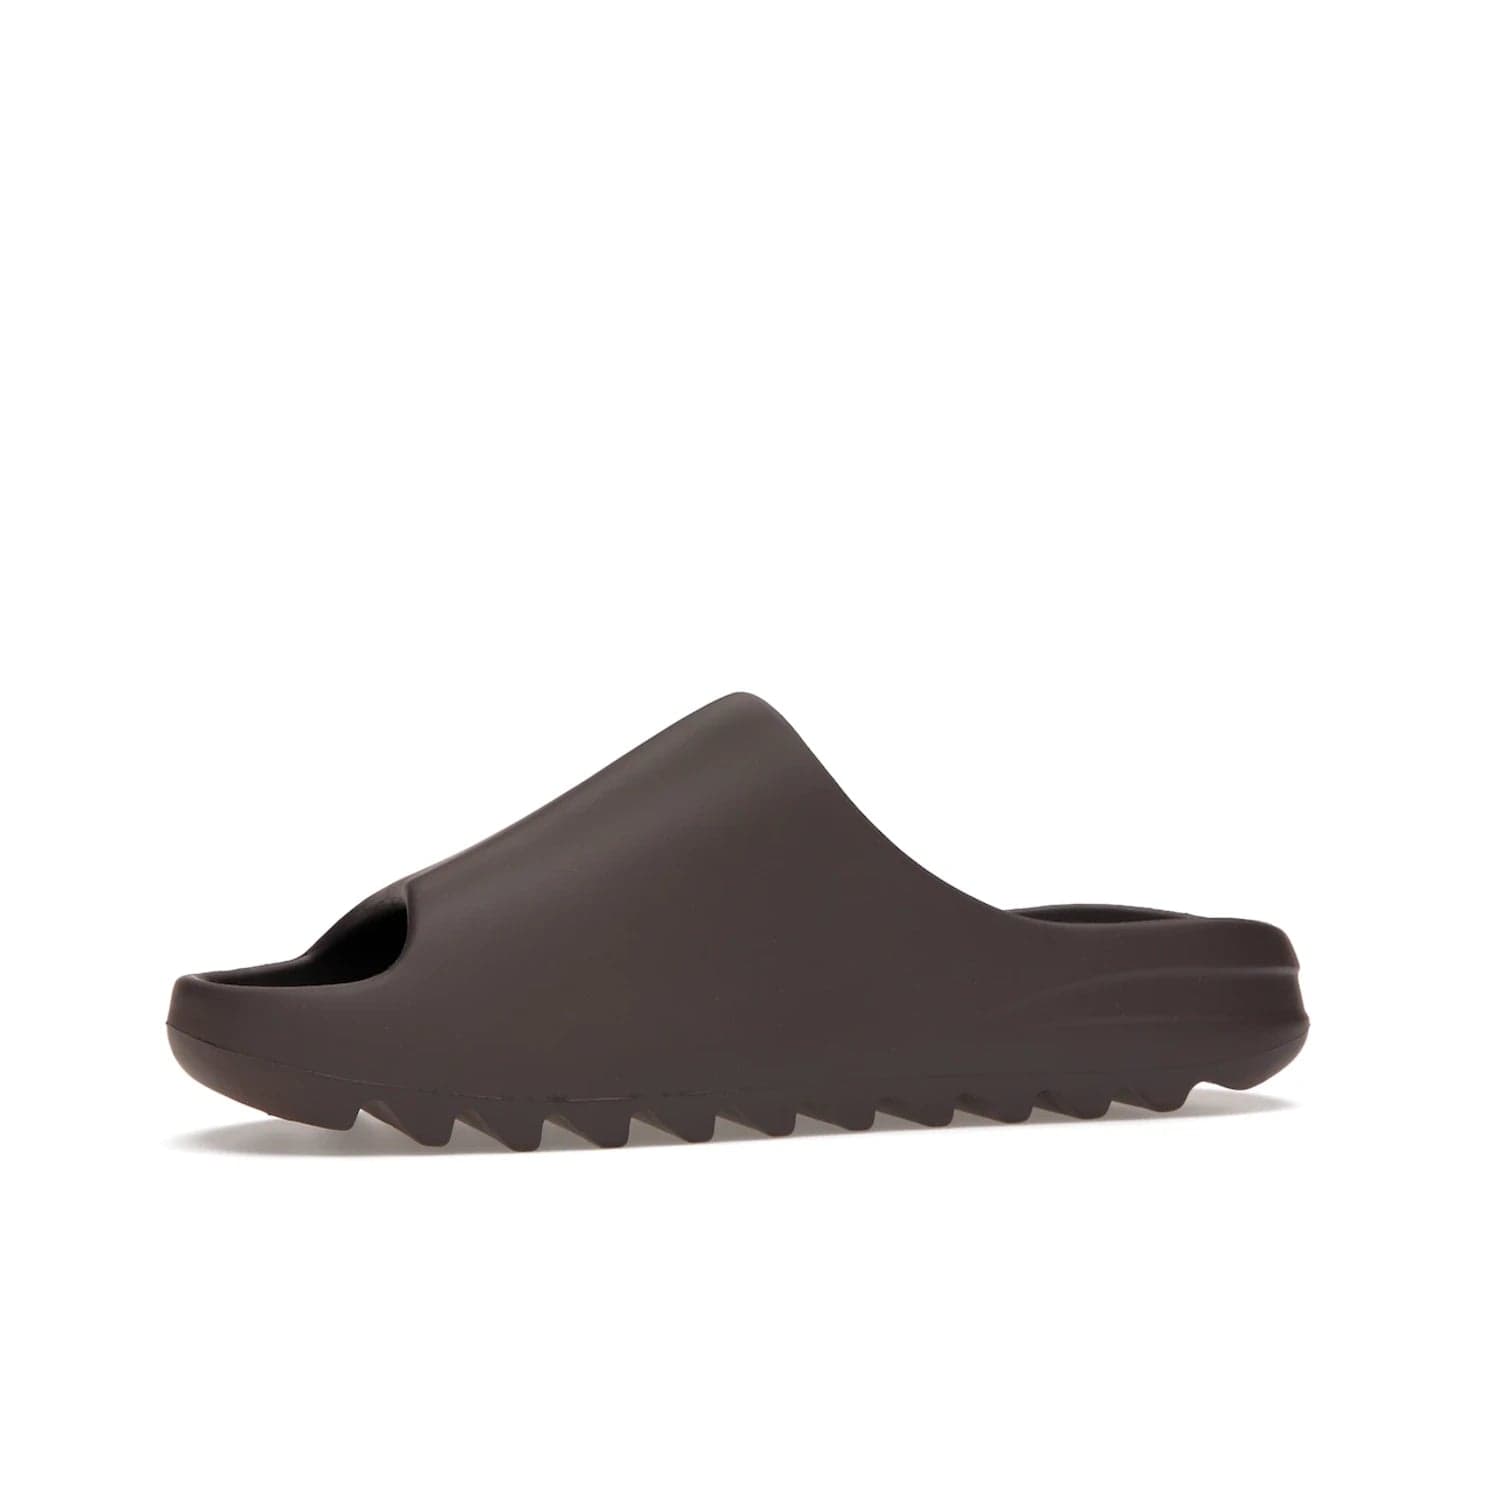 adidas Yeezy Slide Soot - Image 17 - Only at www.BallersClubKickz.com - Shop the Yeezy Slide Soot sneaker by Adidas, a sleek blend of form and function. Monochrome silhouette in Soot/Soot/Soot. Lightweight EVA foam offers comfort and durability. Get the must-have style today.